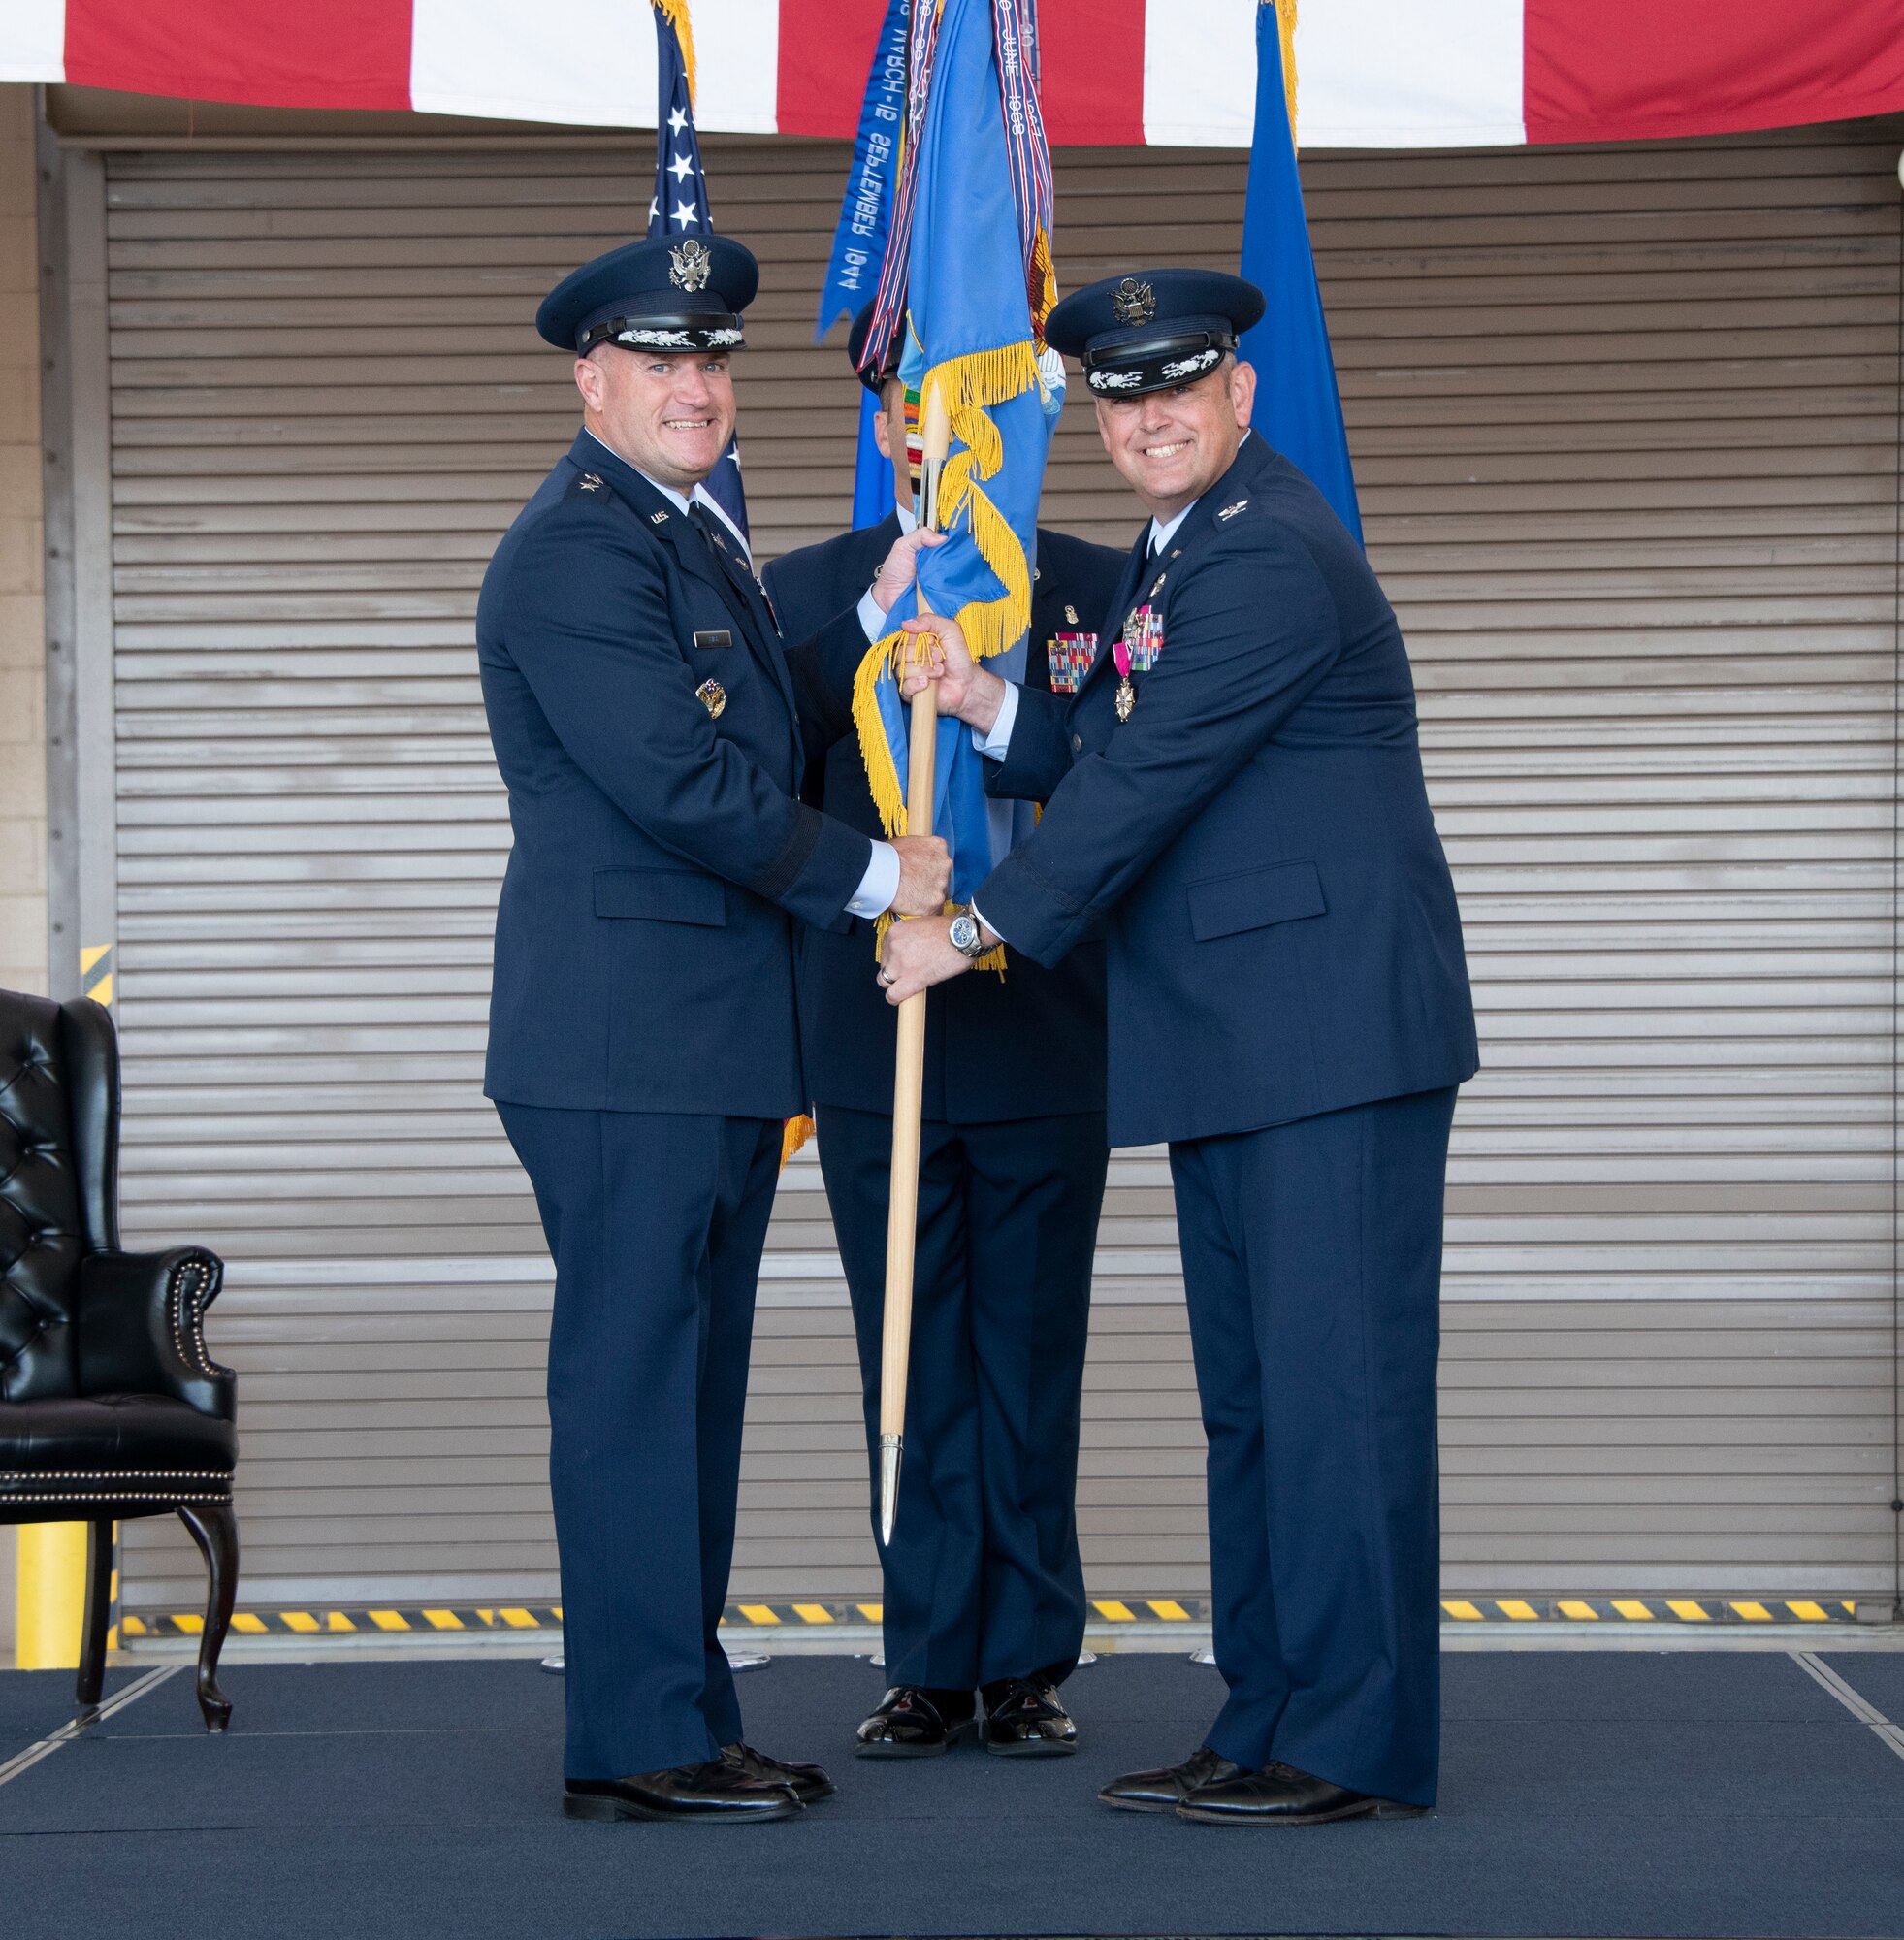 U.S. Air Force Maj. Gen. Kenneth Bibb, left, 18th Air Force commander, accepts the guidon from Col. Corey Simmons, right, outgoing 60th Air Mobility Wing commander, during the 60th AMW change of command ceremony at Travis Air Force Base, California, July 27, 2022. Bibb was the presiding officer for the change of command ceremony. (U.S. Air Force photo by Heide Couch)